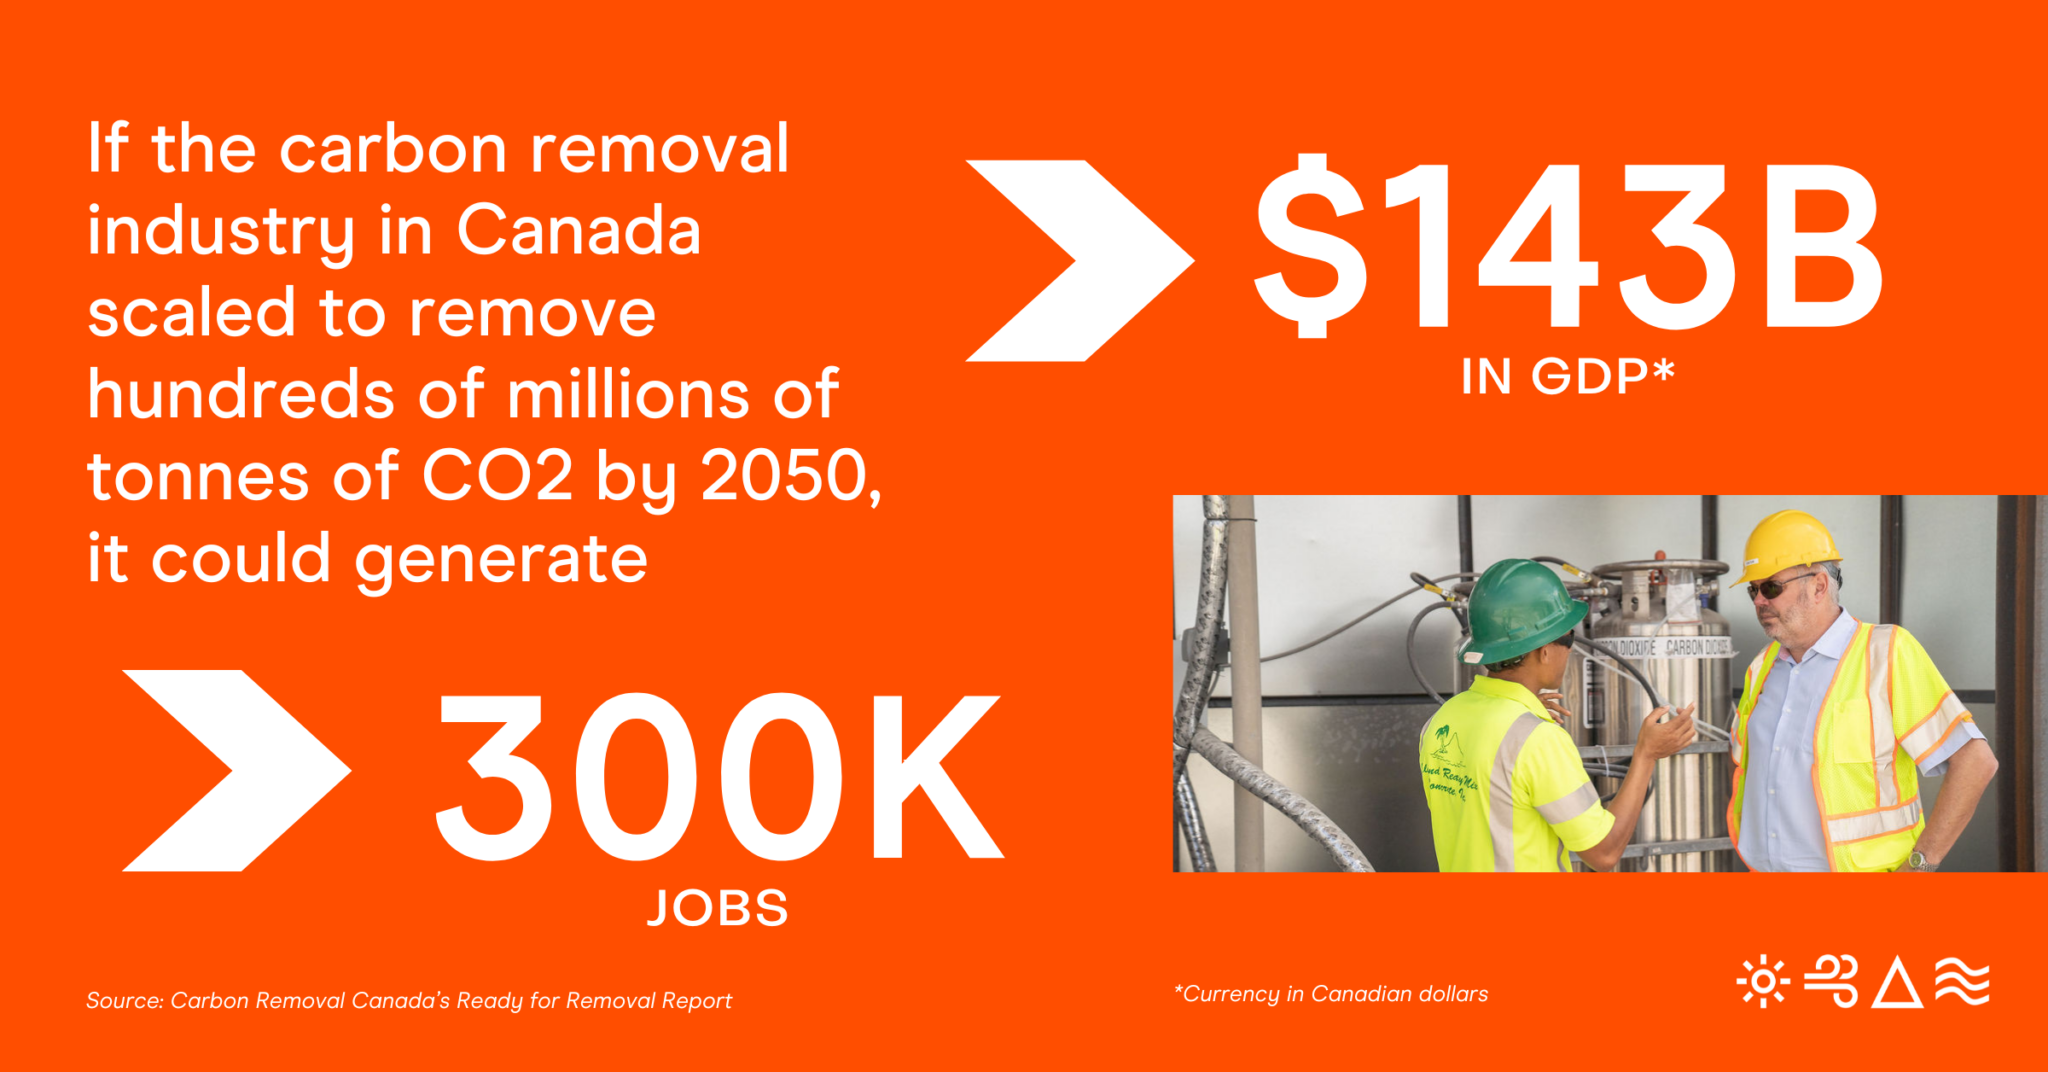 Data graphic: An analysis commissioned by Carbon Removal Canada estimated that a CDR industry removing hundreds of millions of tonnes of CO2 from the atmosphere by 2050 could create over 300,000 jobs, add $143 billion in GDP